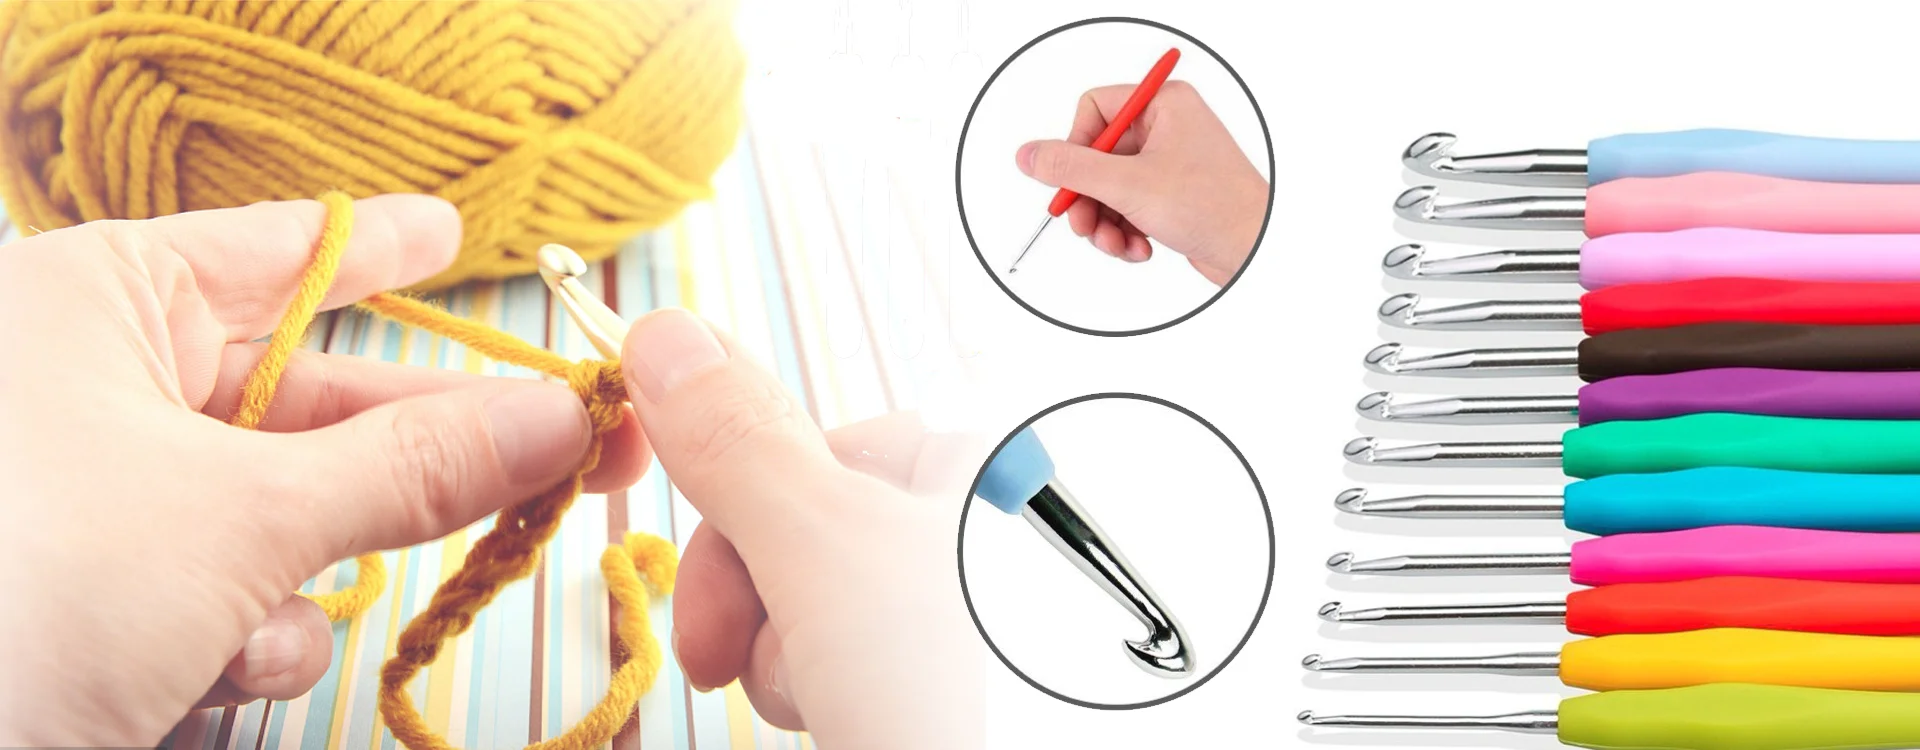 36 Styles Crochet Hooks Set Knitting With Yarn Weave Knitting Needles Hook  Kit Sewing Tools Gauge Scissors Knit With Storage Bag - Sewing Tools &  Accessory - AliExpress